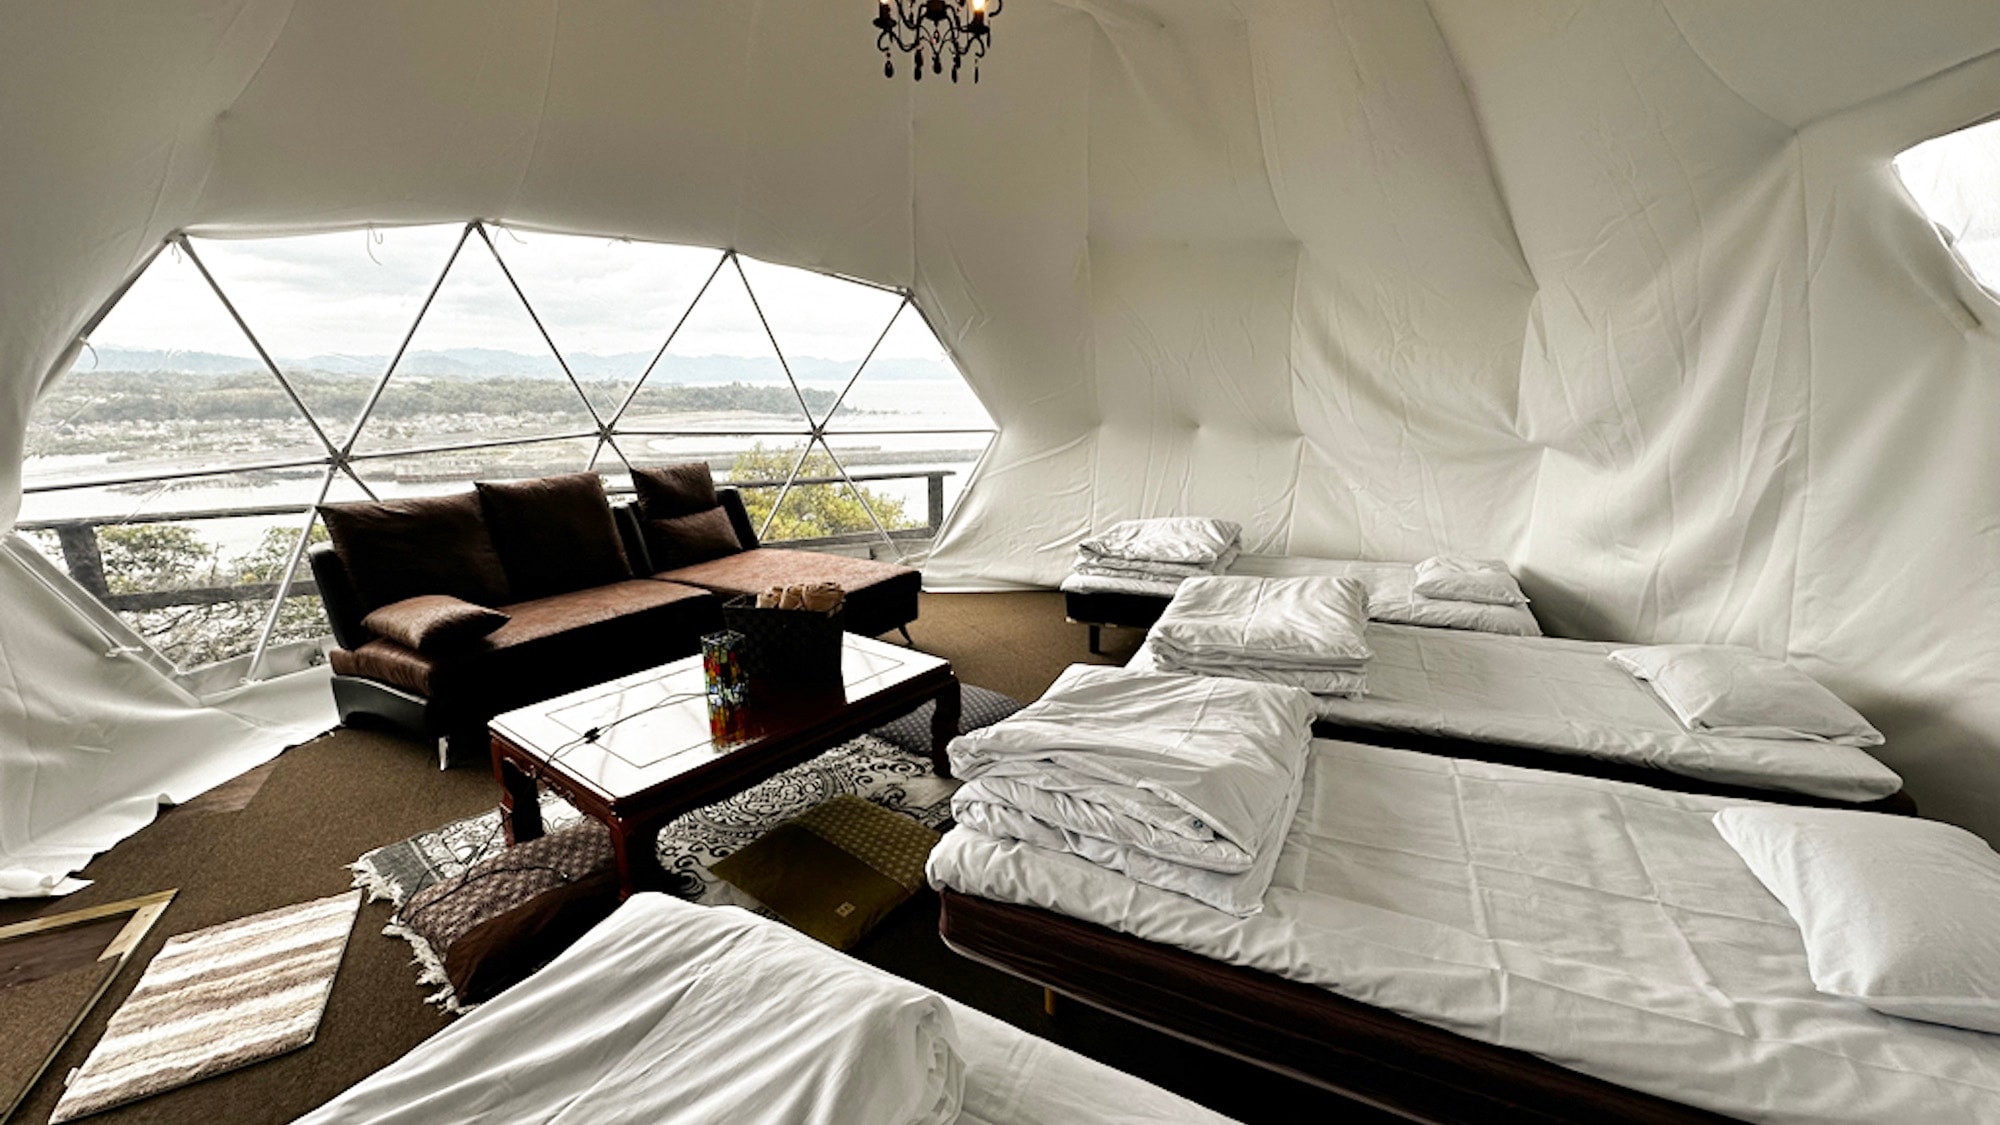 ・[Ocean Dome 9] Accommodates up to 8 people. Enjoy comfortable glamping in a spacious tent